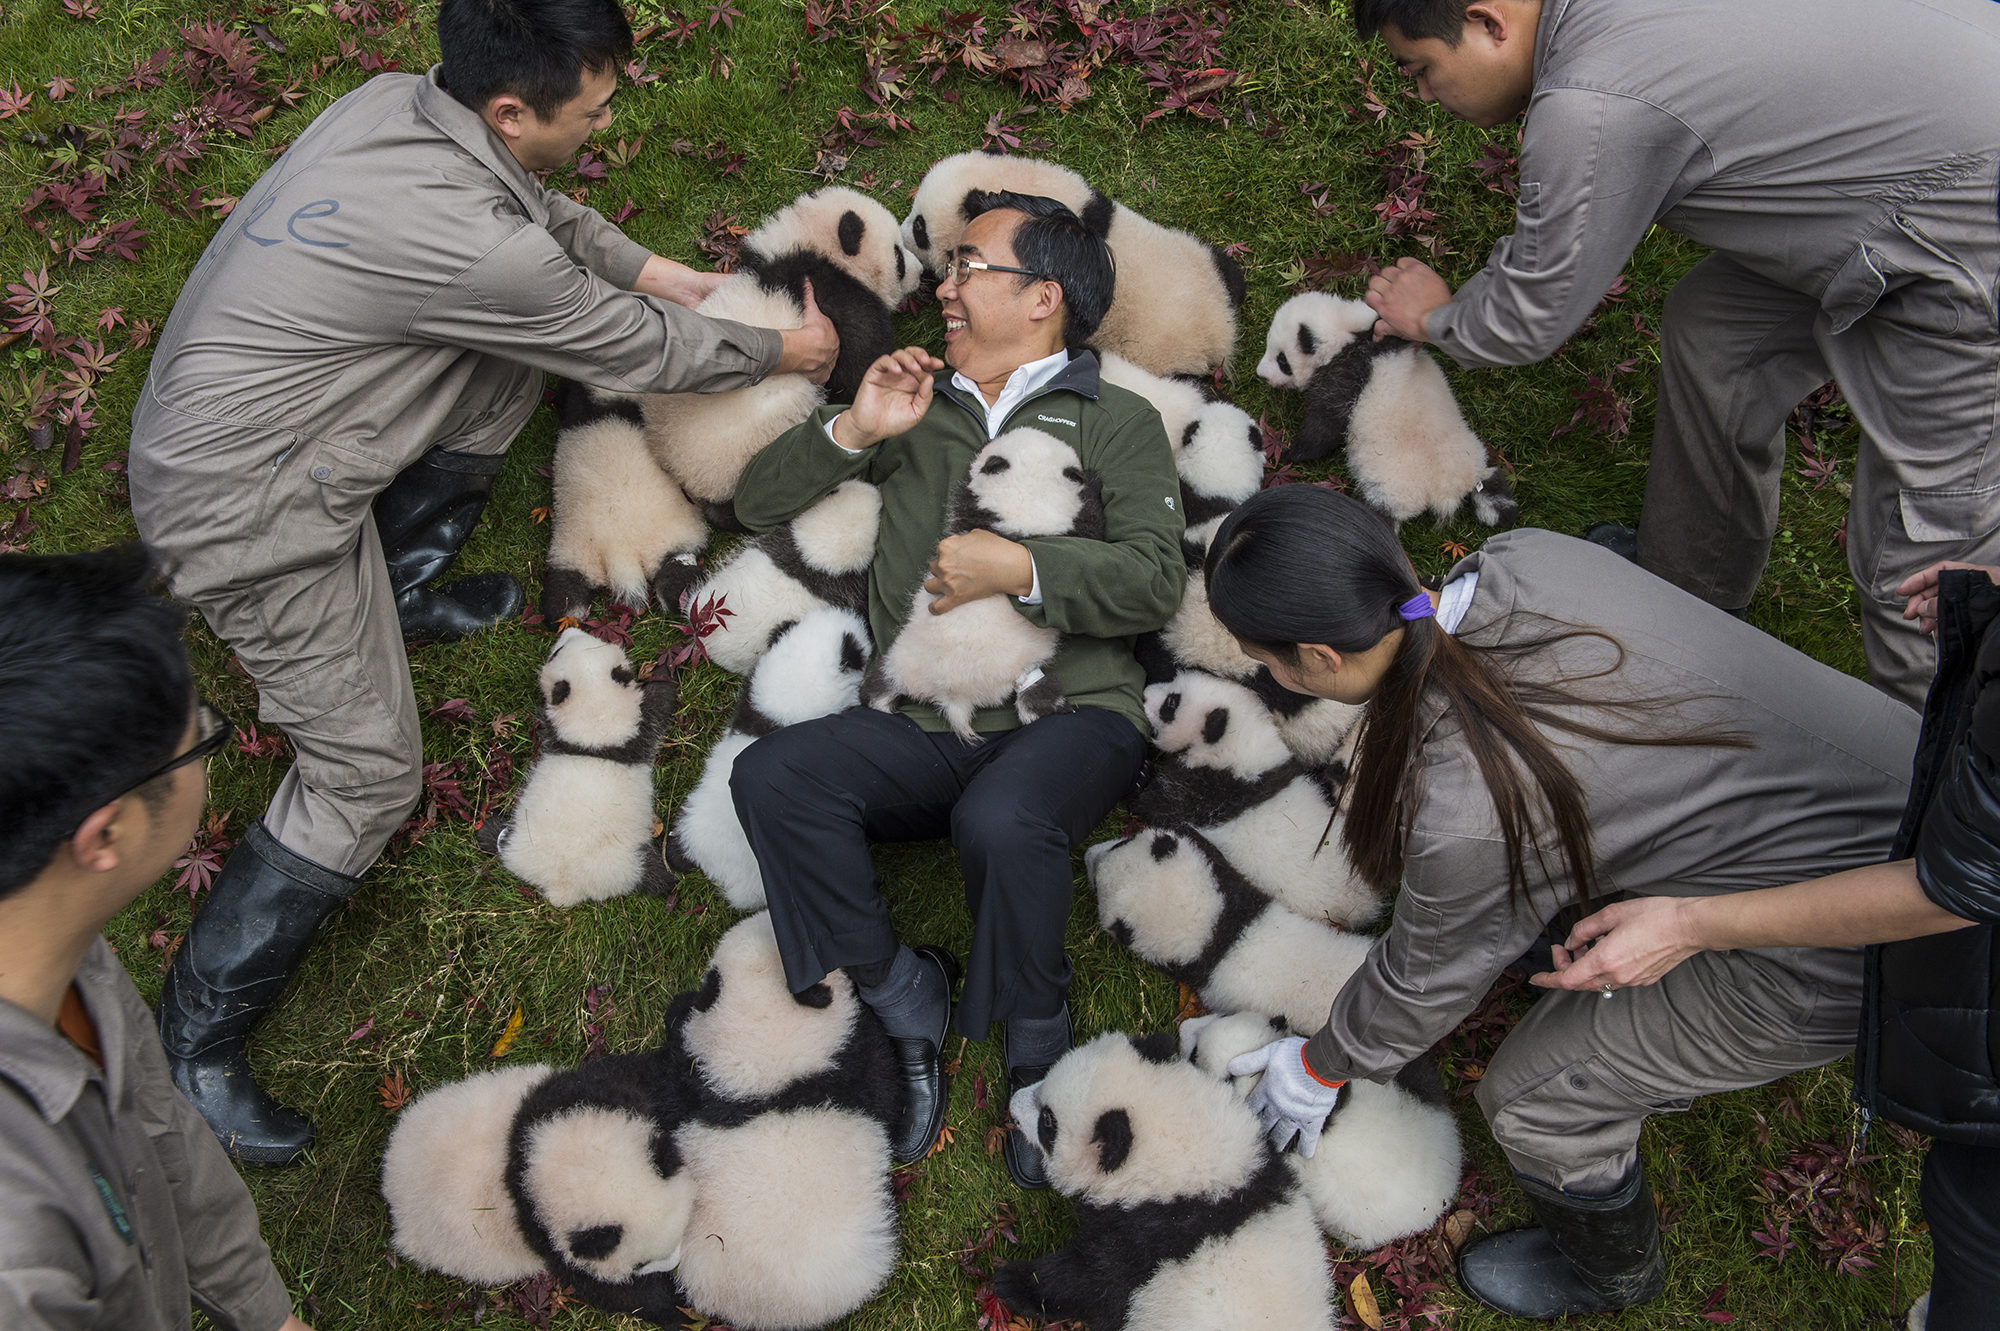 Zhang Hemin—“Papa Panda” to his staff—poses with cubs born in 2015 at Bifengxia Panda Base. “Some local people say giant pandas have magic powers,” says Zhang, who directs many of China’s panda conservation efforts. “To me, they simply represent beauty and peace.”